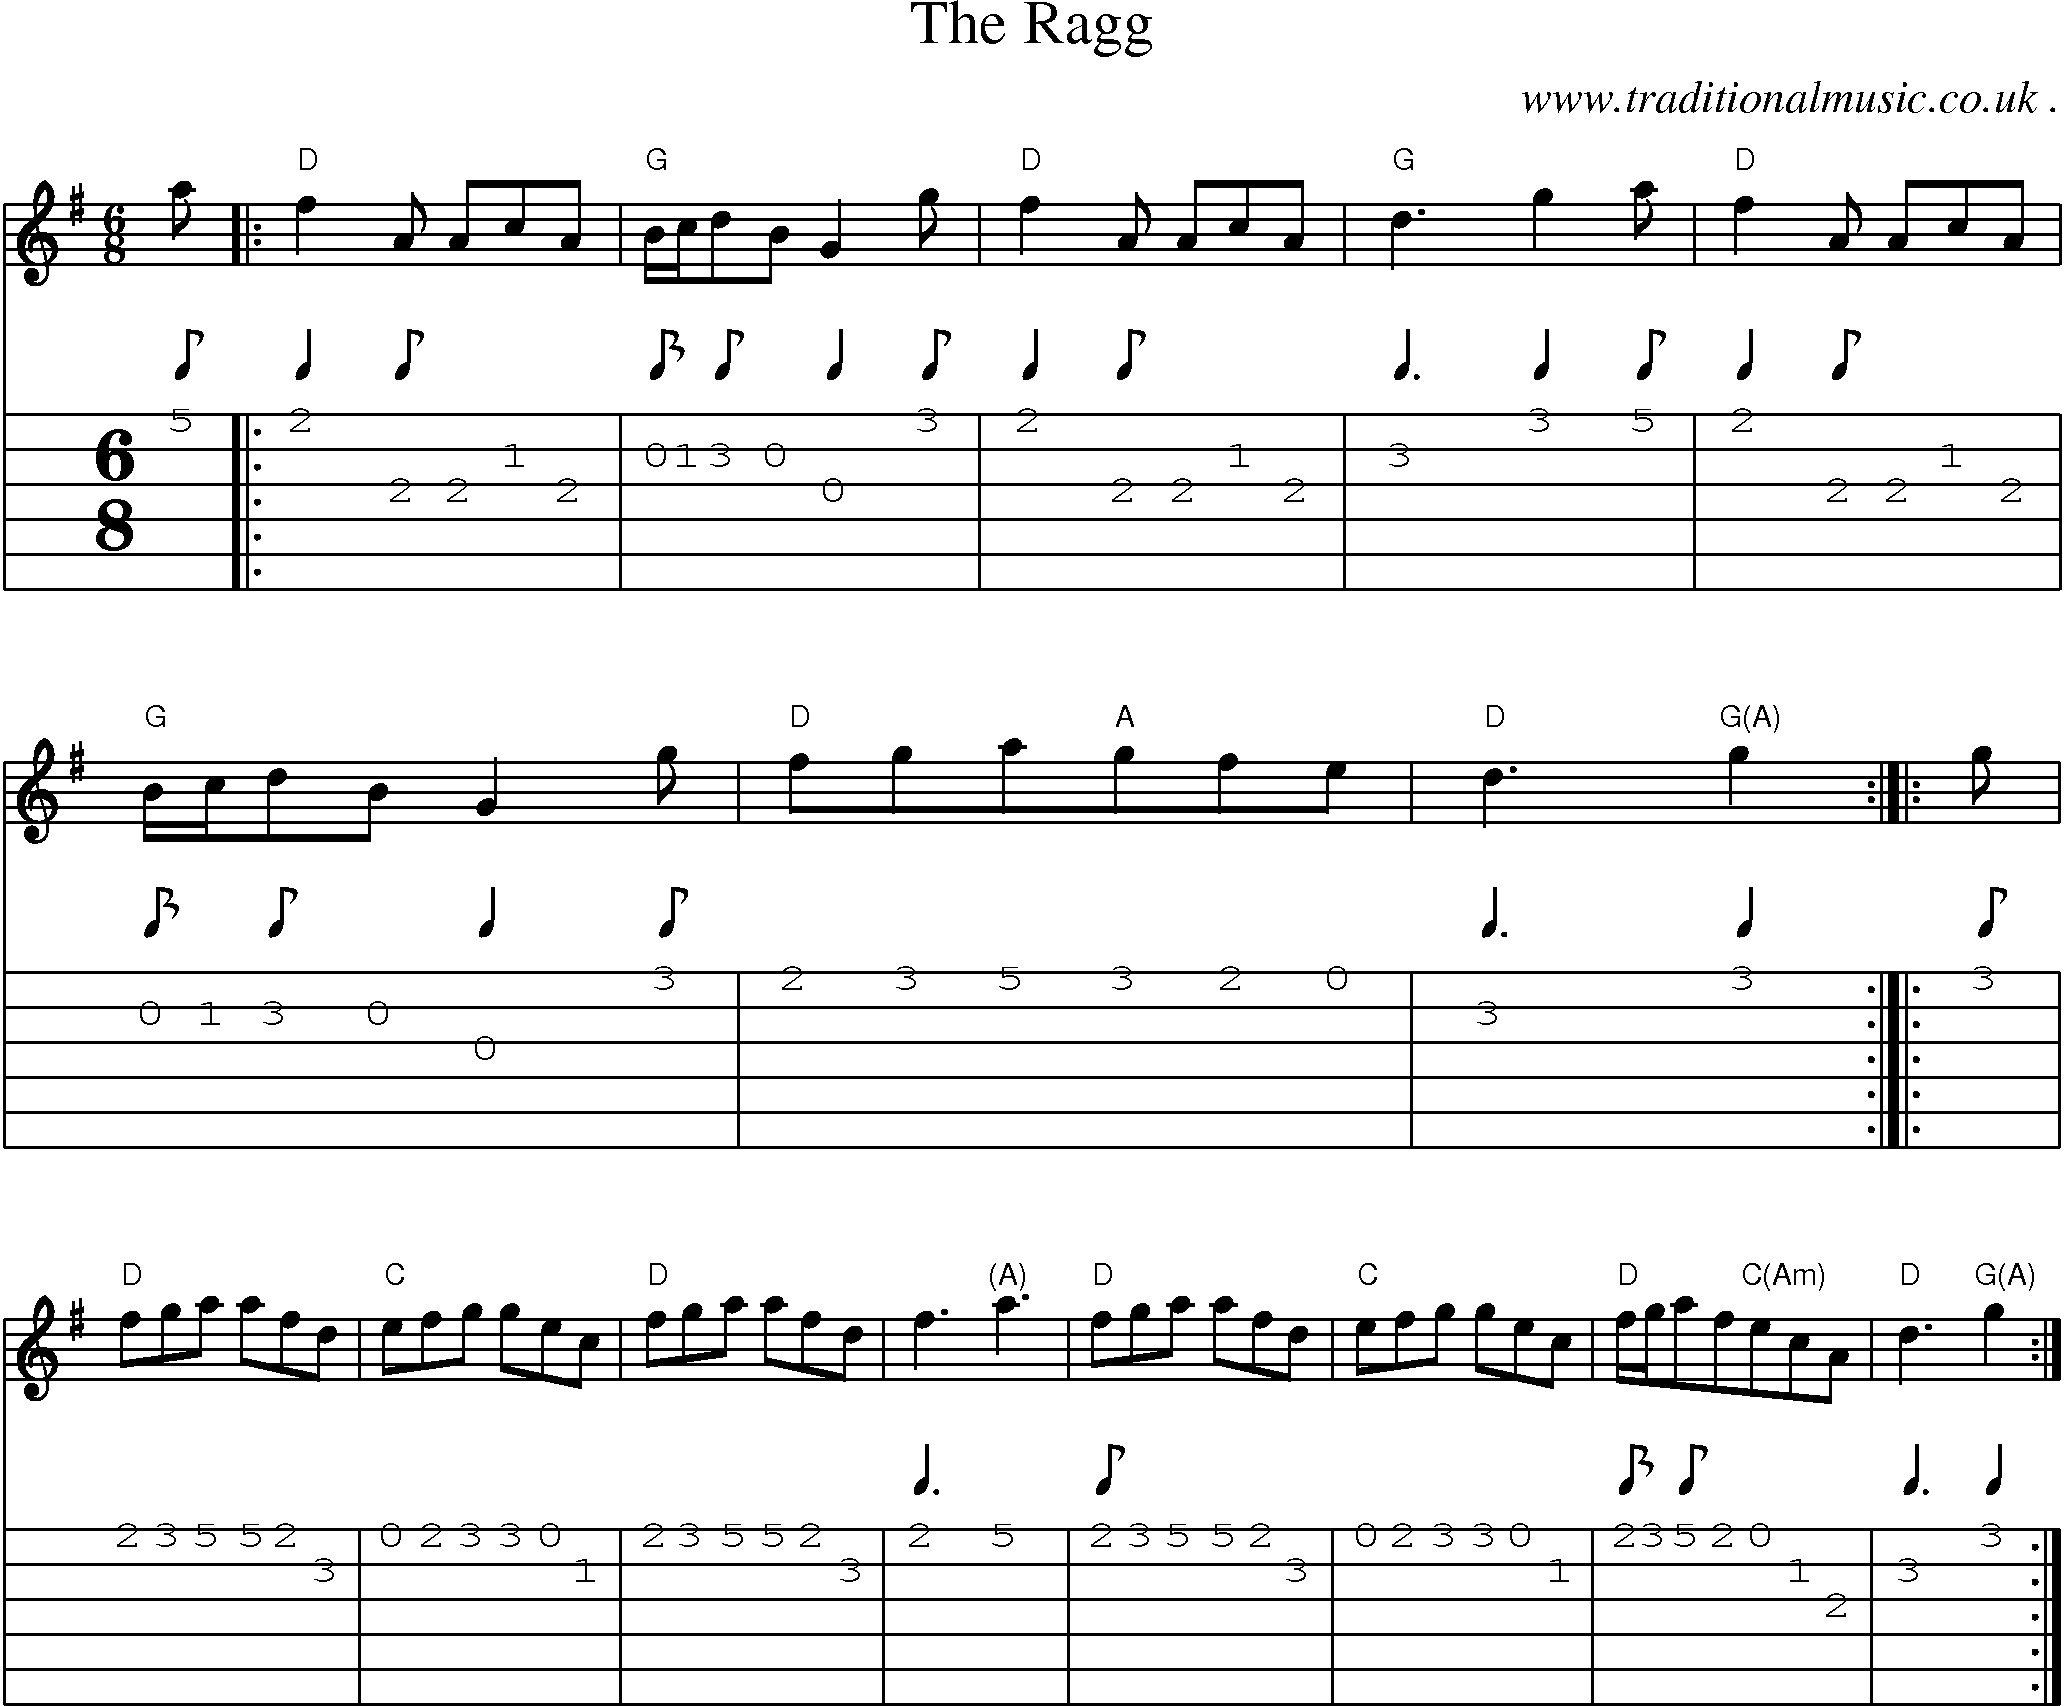 Sheet-Music and Guitar Tabs for The Ragg